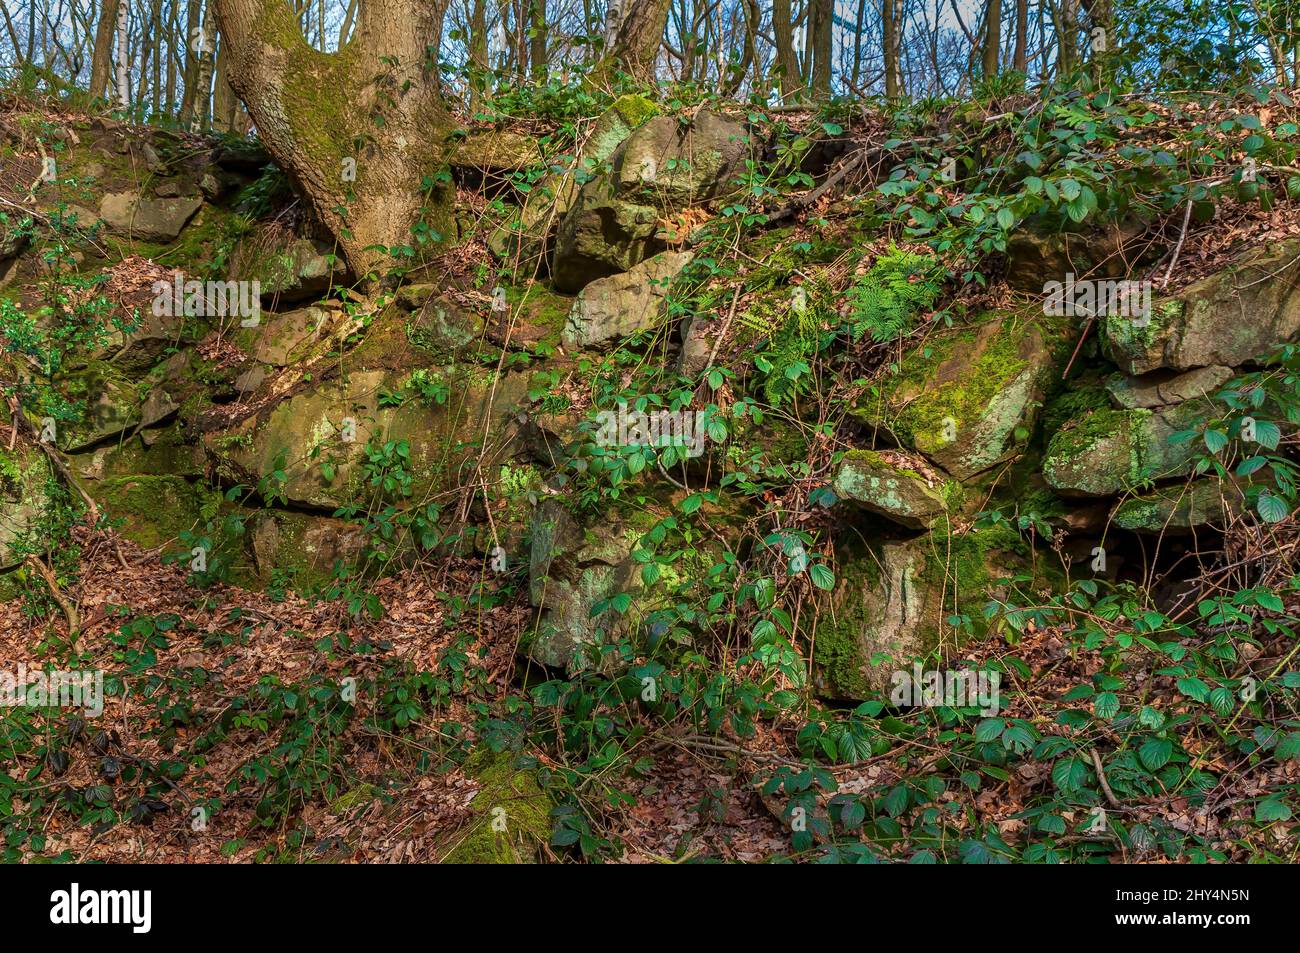 Gritstone quarry that once housed two adits for now-abandoned mine workings for ganister, found in Beeley Wood, Oughtibridge, near Sheffield. Stock Photo